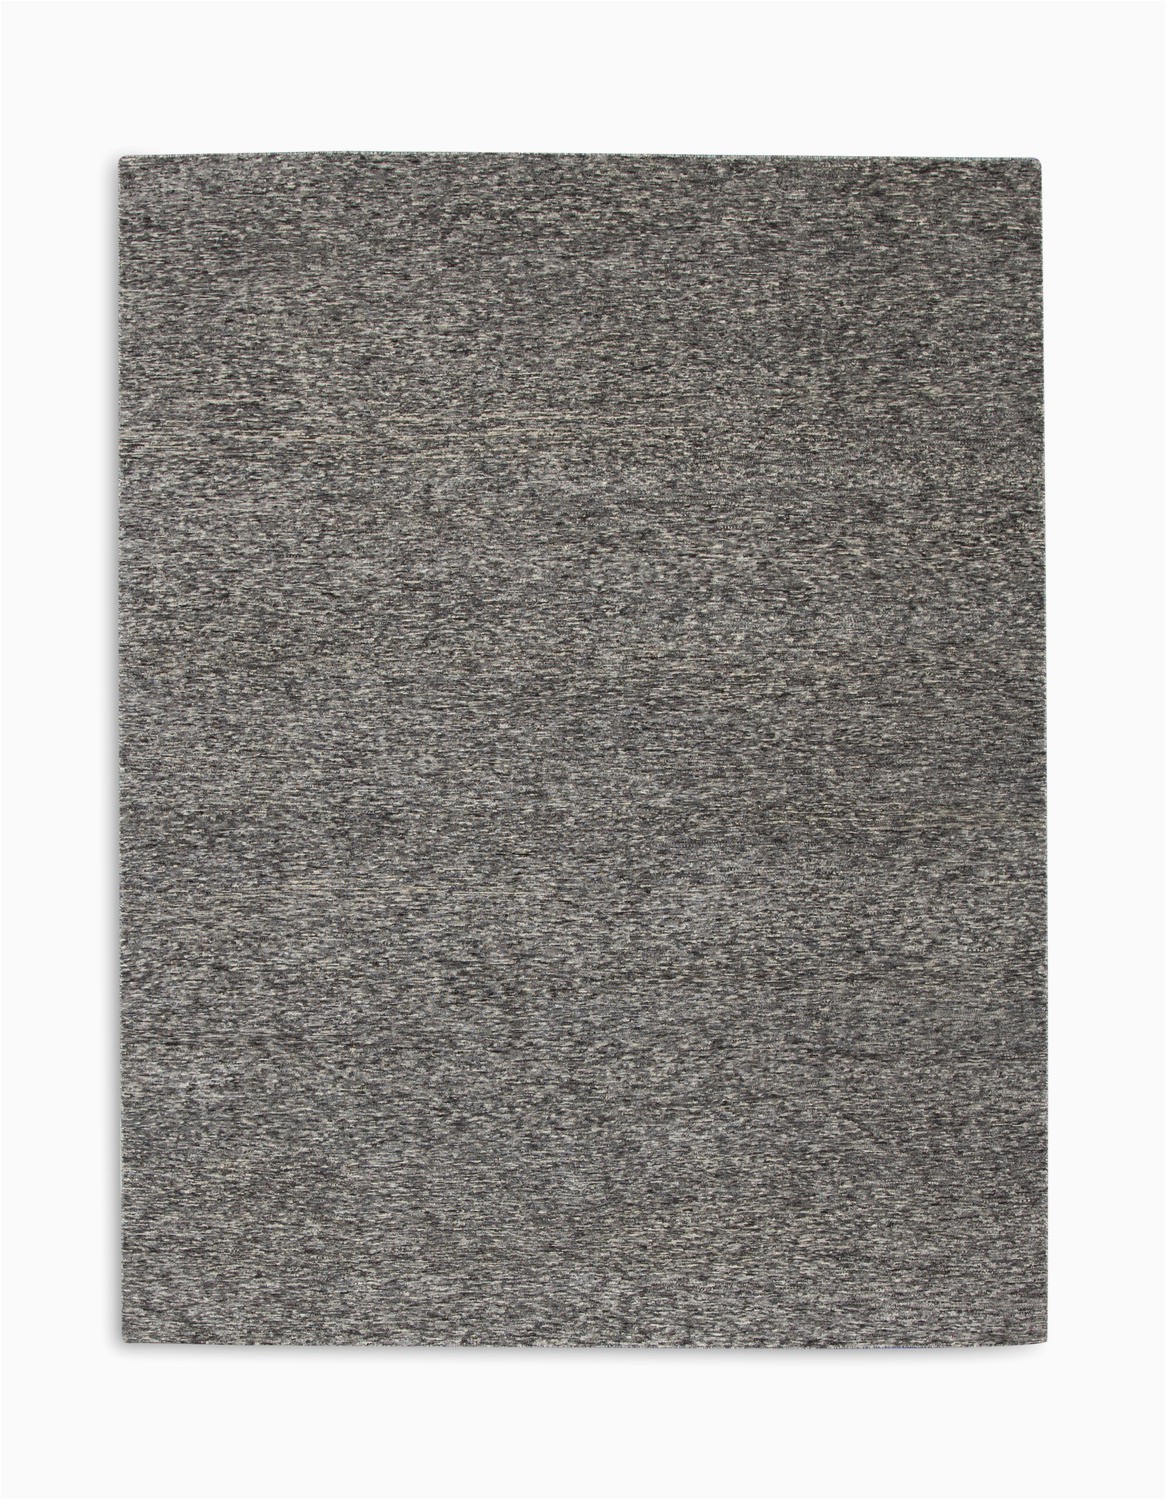 9 by 9 area Rug Hand Knotted 7′8″ X 9′9″ area Rug